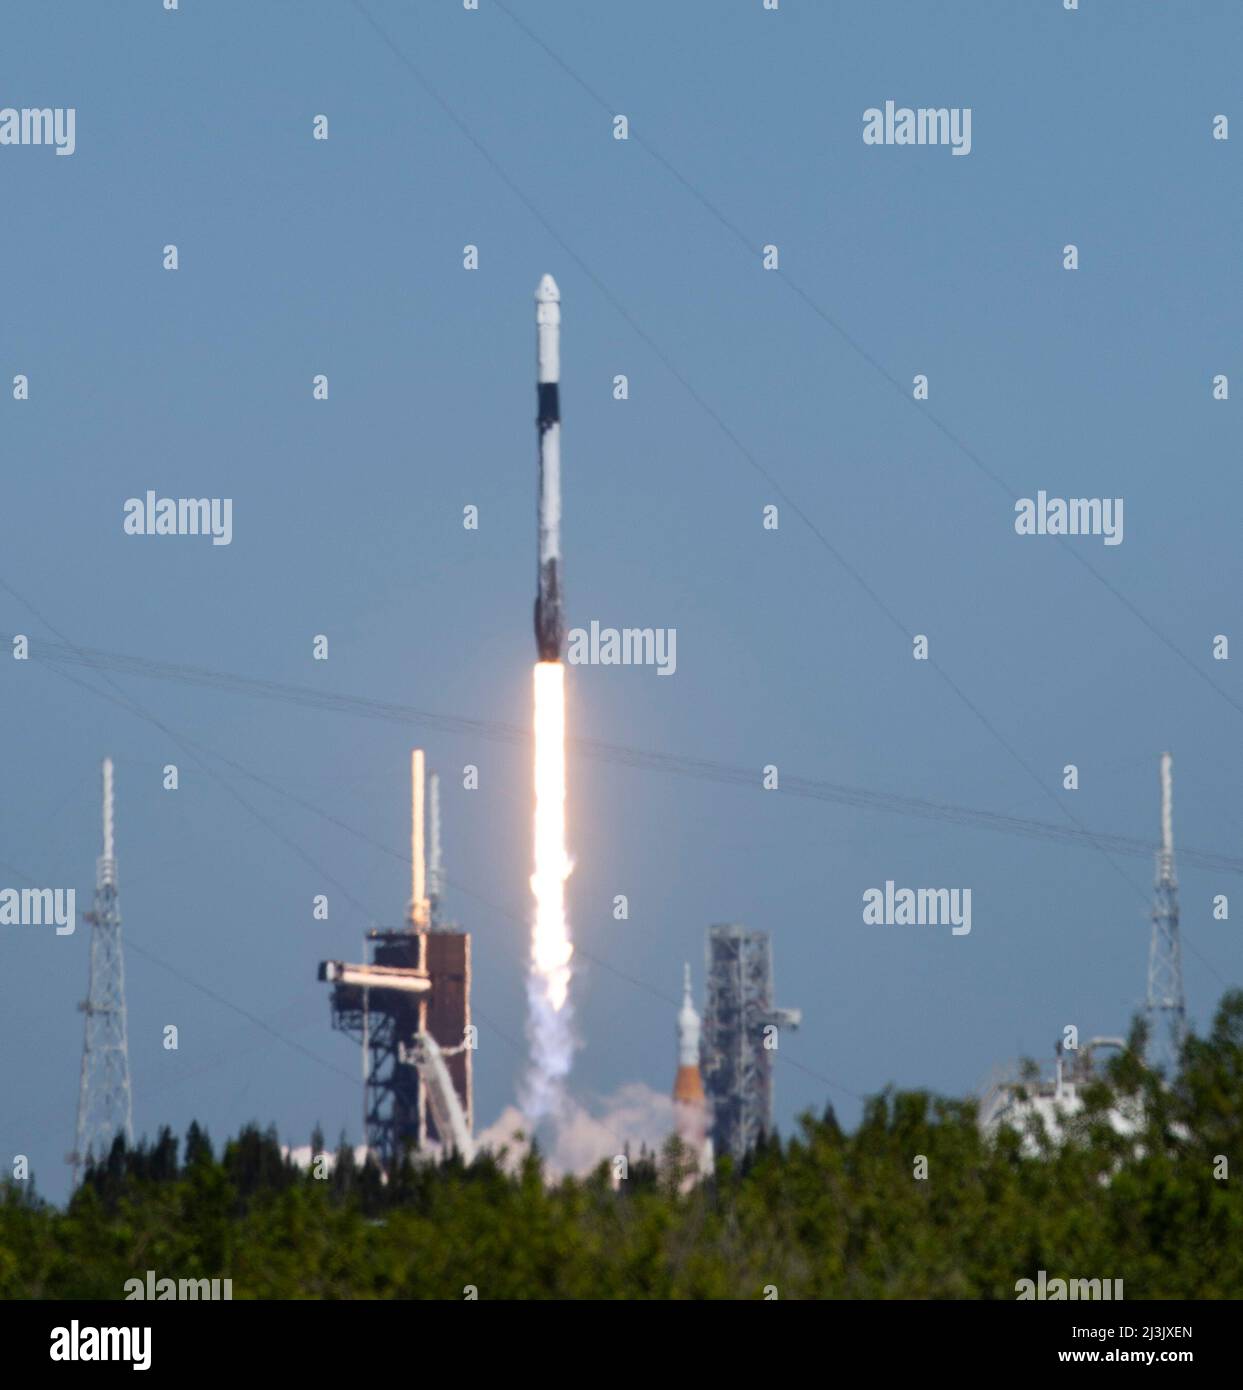 Florida, USA. 08th Apr, 2022. NASA's Space Launch System (SLS) rocket with the Orion spacecraft aboard is seen atop a mobile launcher at Launch Complex 39B, right, as a SpaceX Falcon 9 rocket carrying the company's Crew Dragon spacecraft is launched on Axiom Mission 1 (Ax-1) to the International Space Station with Commander Michael López-Alegría of Spain and the United States, Pilot Larry Connor of the United States, and Mission Specialists Eytan Stibbe of Israel, and Mark Pathy of Canada aboard, Friday, April 8, 2022, at NASA's Kennedy Space Center in Florida. The Ax-1 mission is the first pr Stock Photo